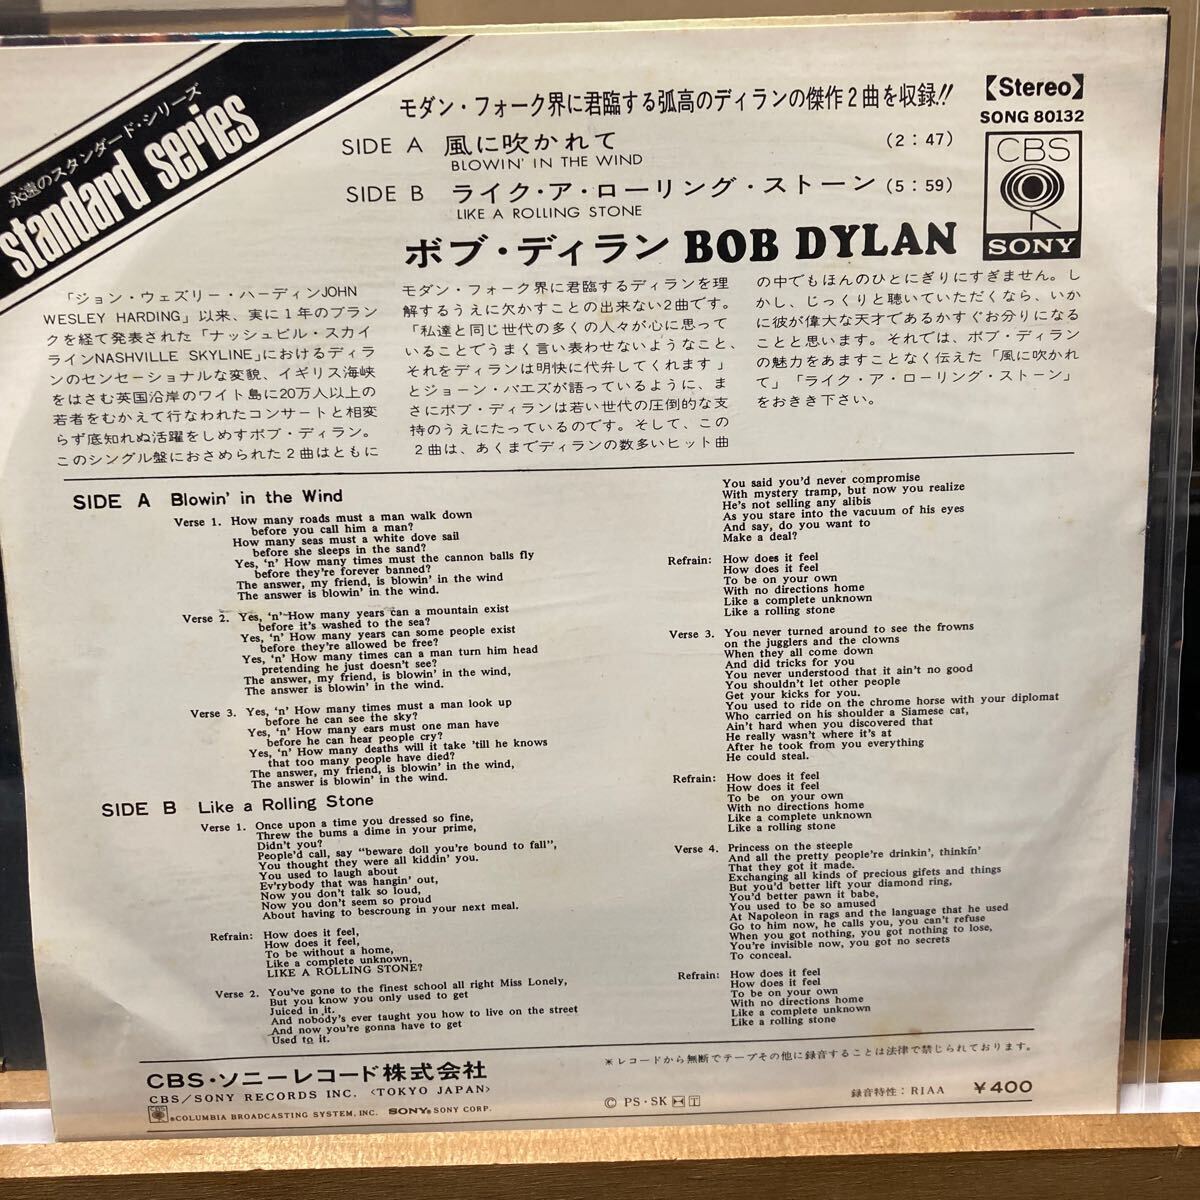 Bob Dylan 【風に吹かれて Blowin' In The Wind / ライク・ア・ローリング・ストーン Like A Rolling Stone】国内盤 EP SONG 80132 の画像2